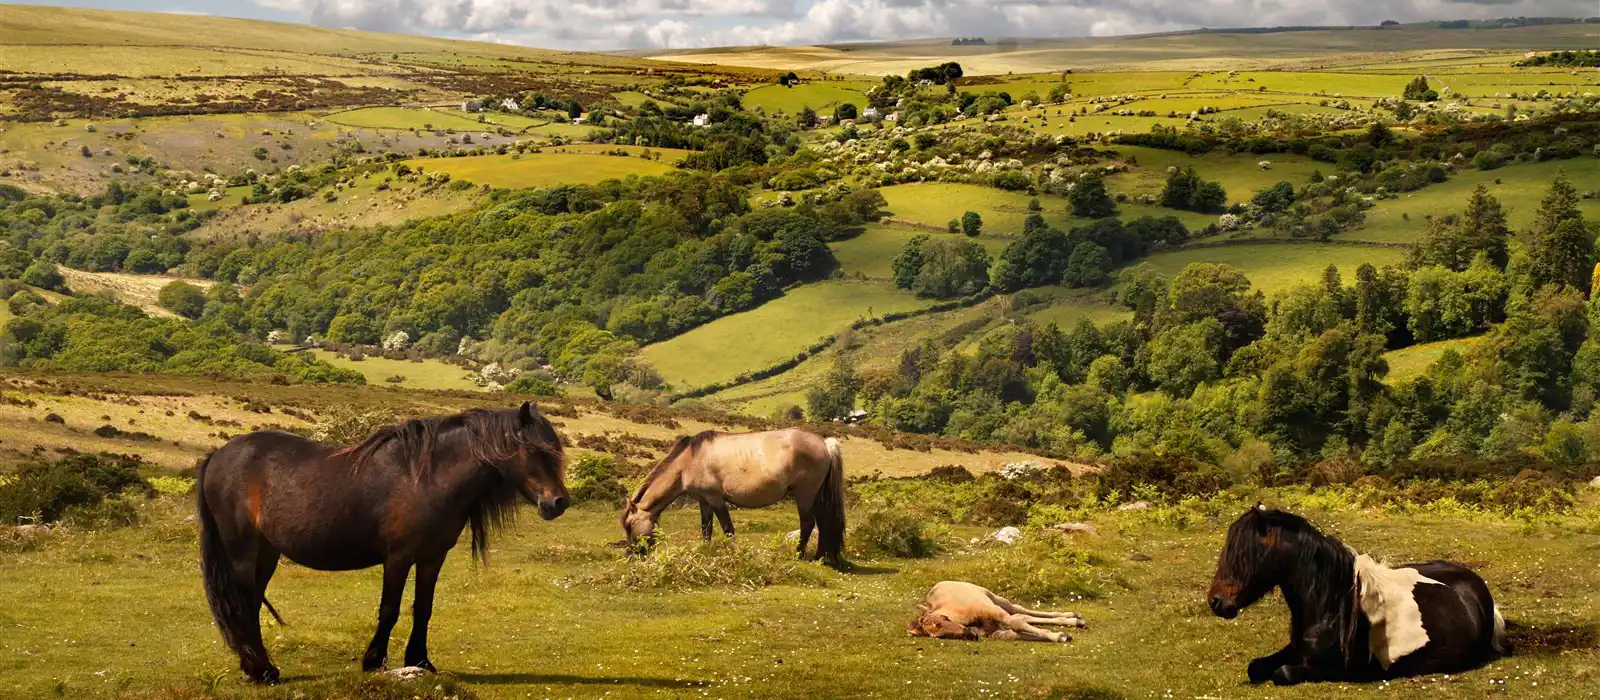 Exmoor ponies roam the national park freely although they are not technically wild